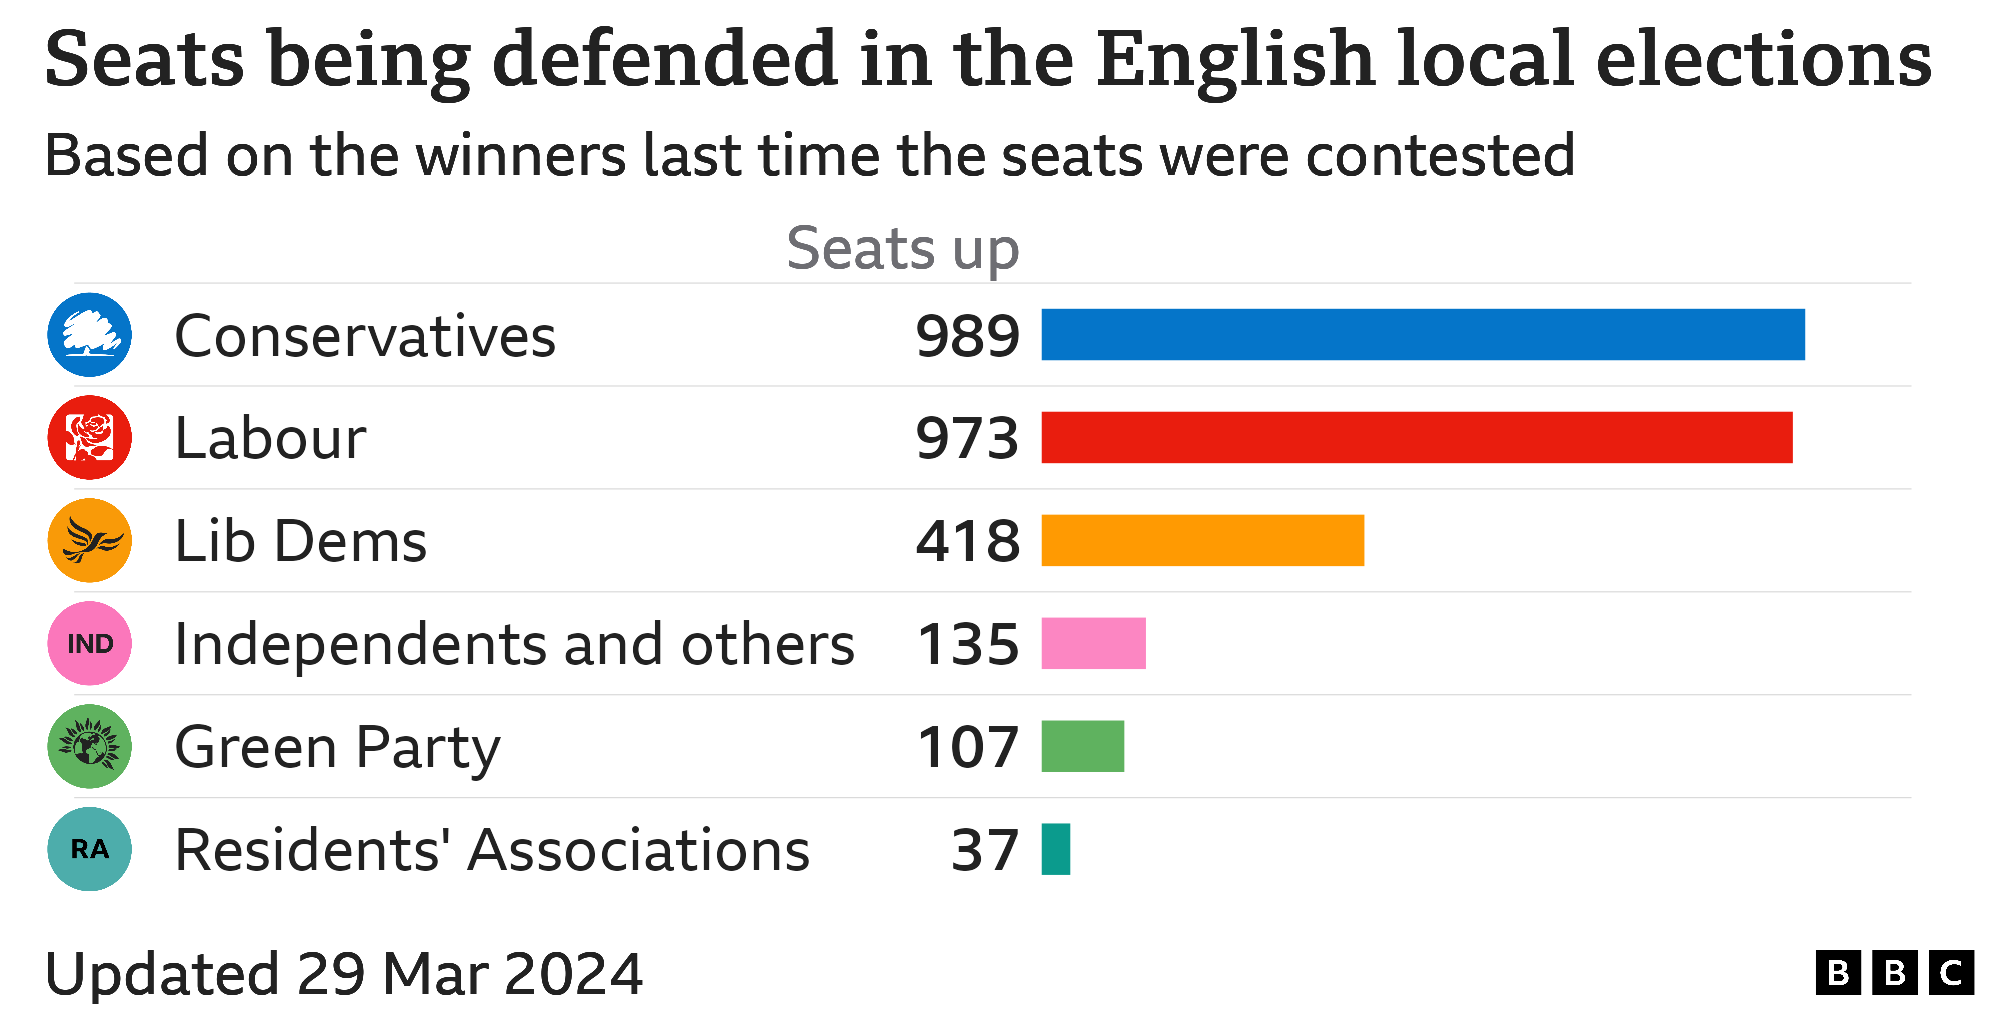 Bar chart showing council seats defended by each party in England, Conservatives 989, Labour 973, Lib Dems 418, Independents and others 135, Green Party 107, Residents' Associations 37